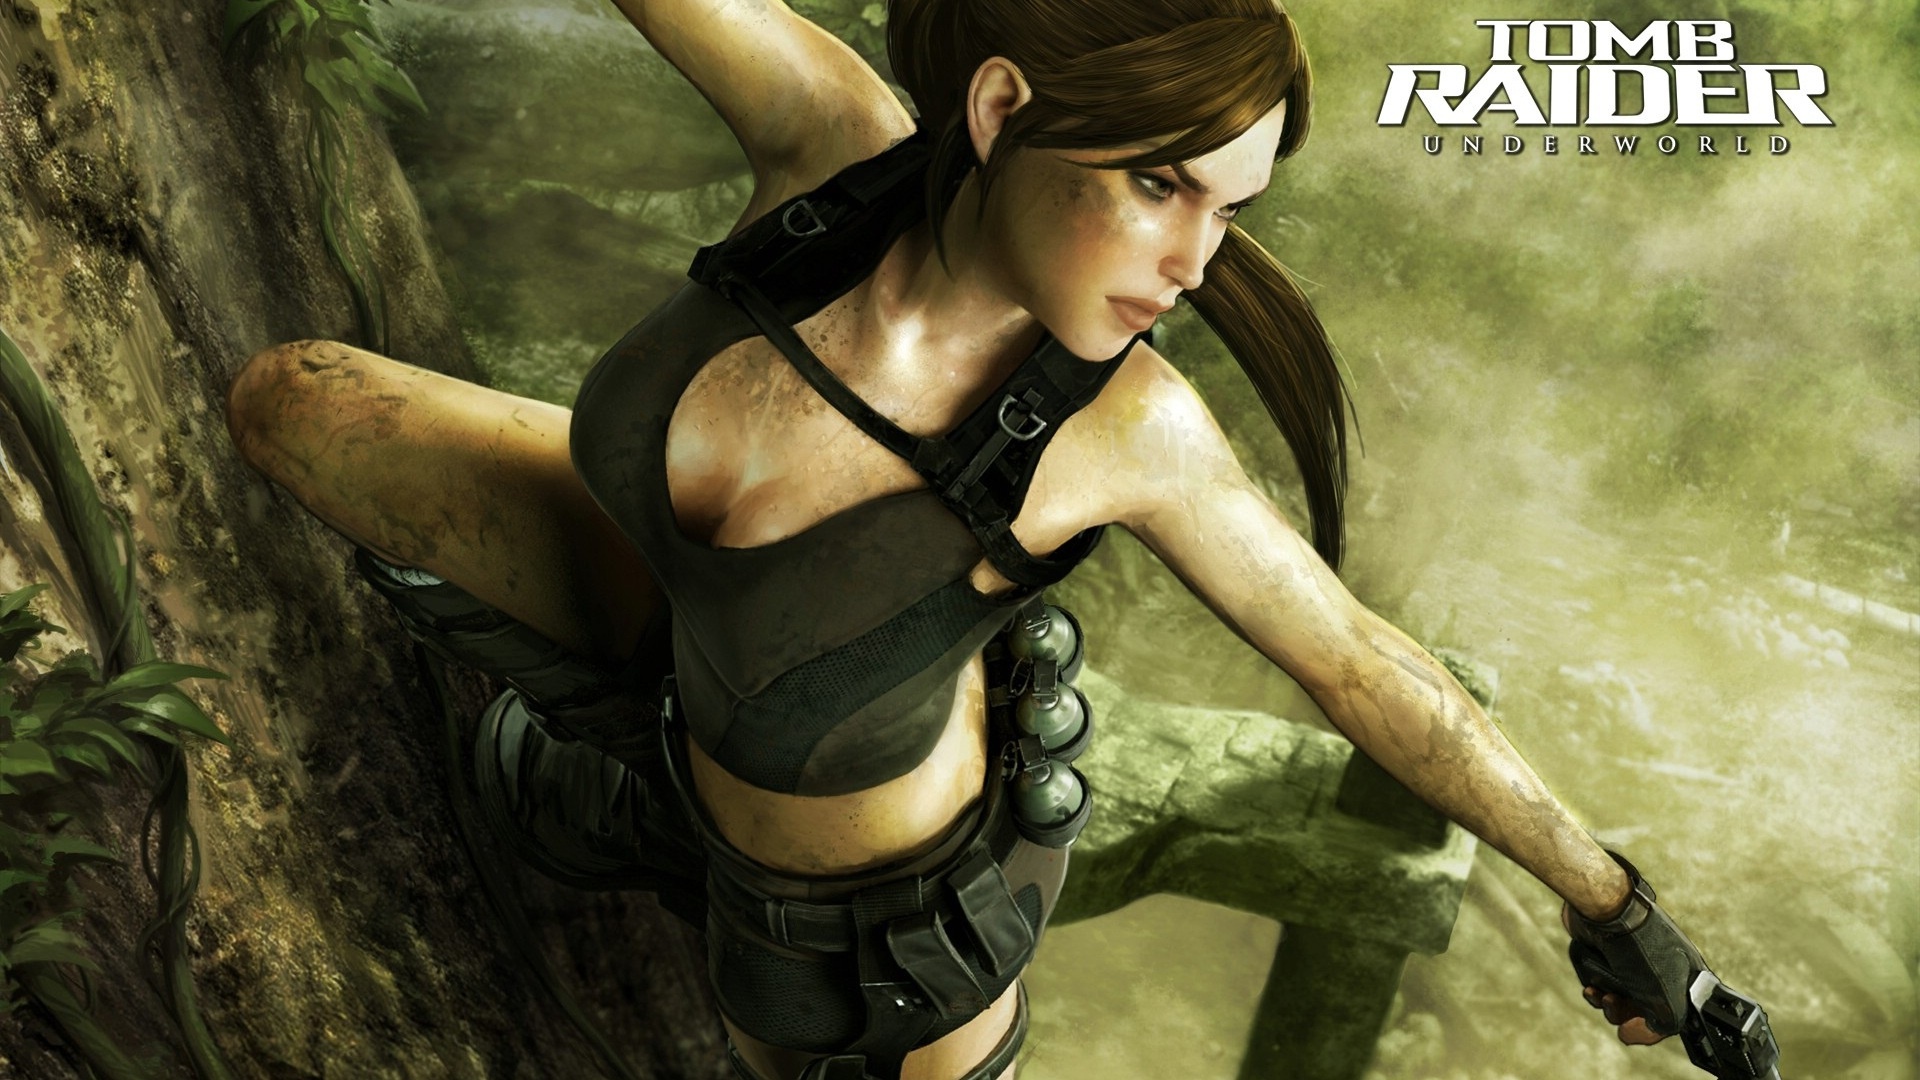 Tomb Raider: Underworld, Exciting free download, Action-packed gameplay, Thrilling missions, 1920x1080 Full HD Desktop